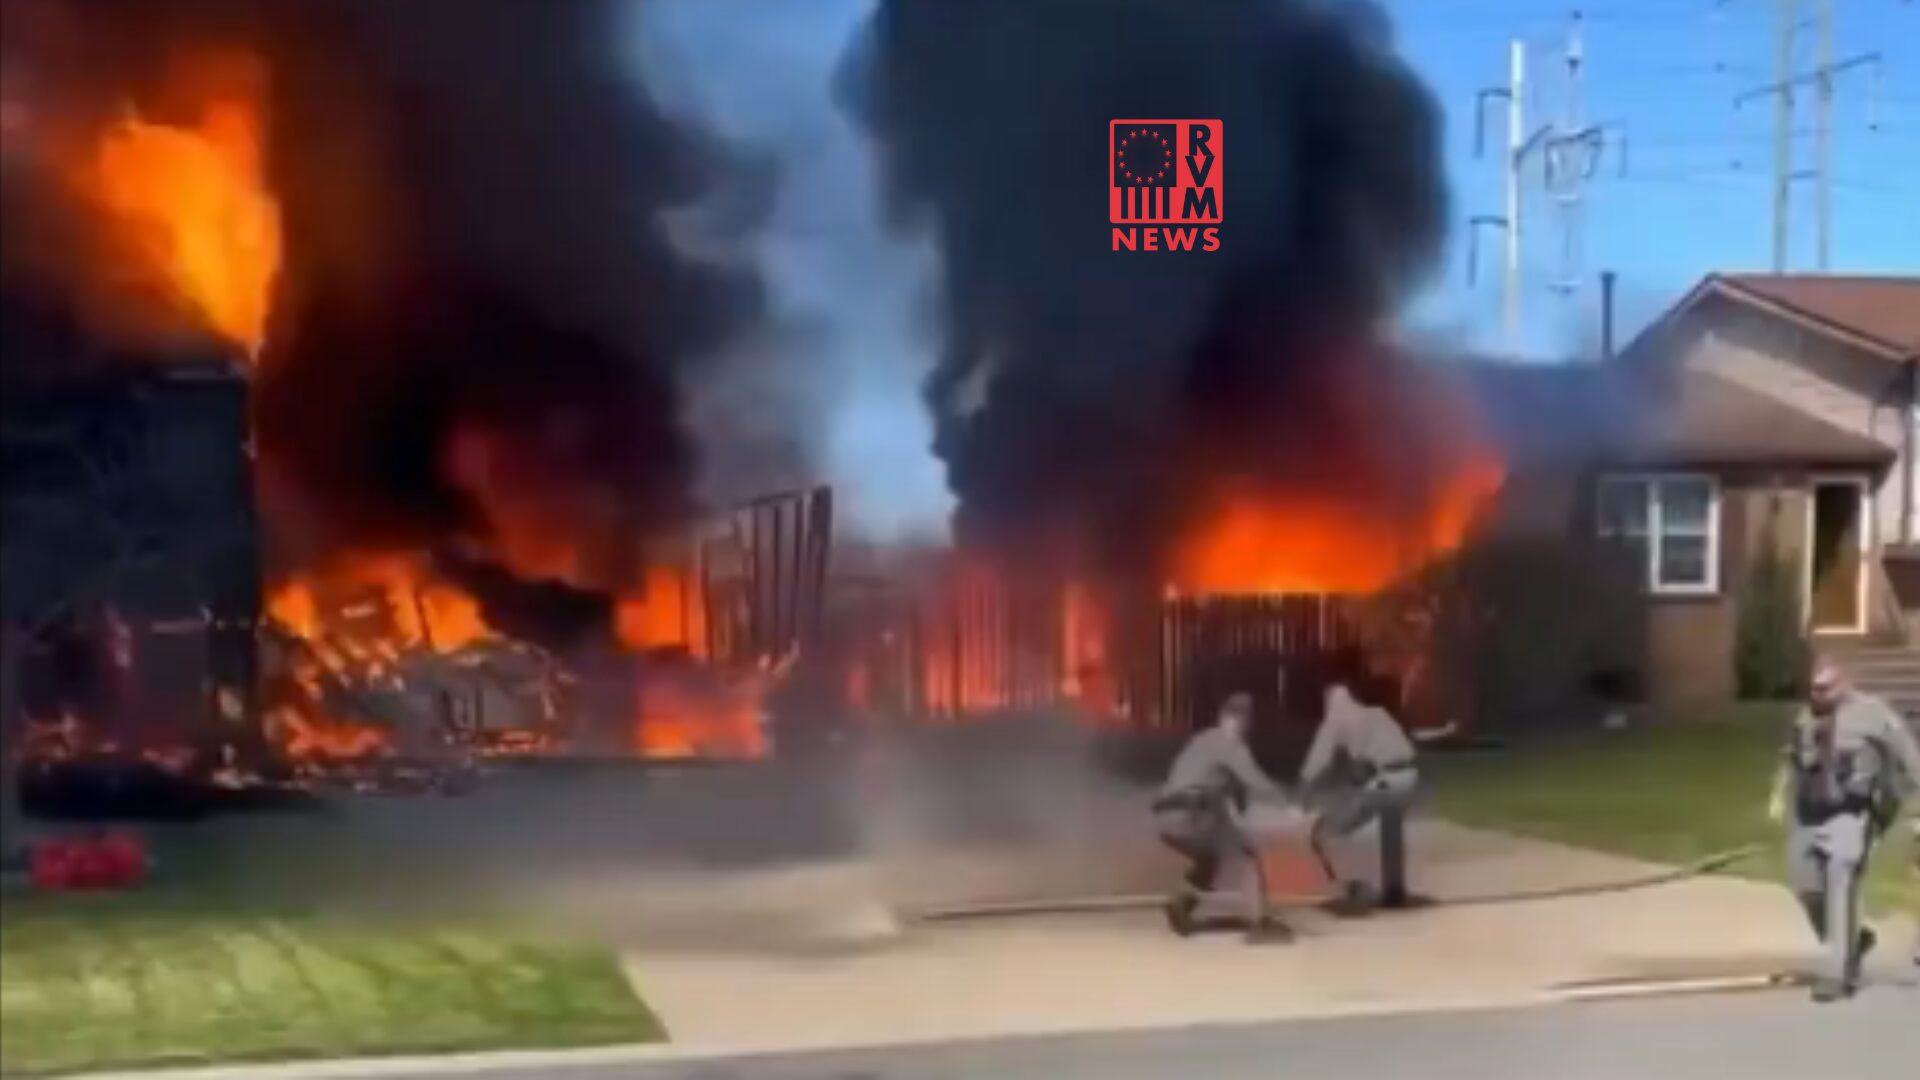 NY State Troopers Rescue A Dog From A Burning Home [VIDEO]